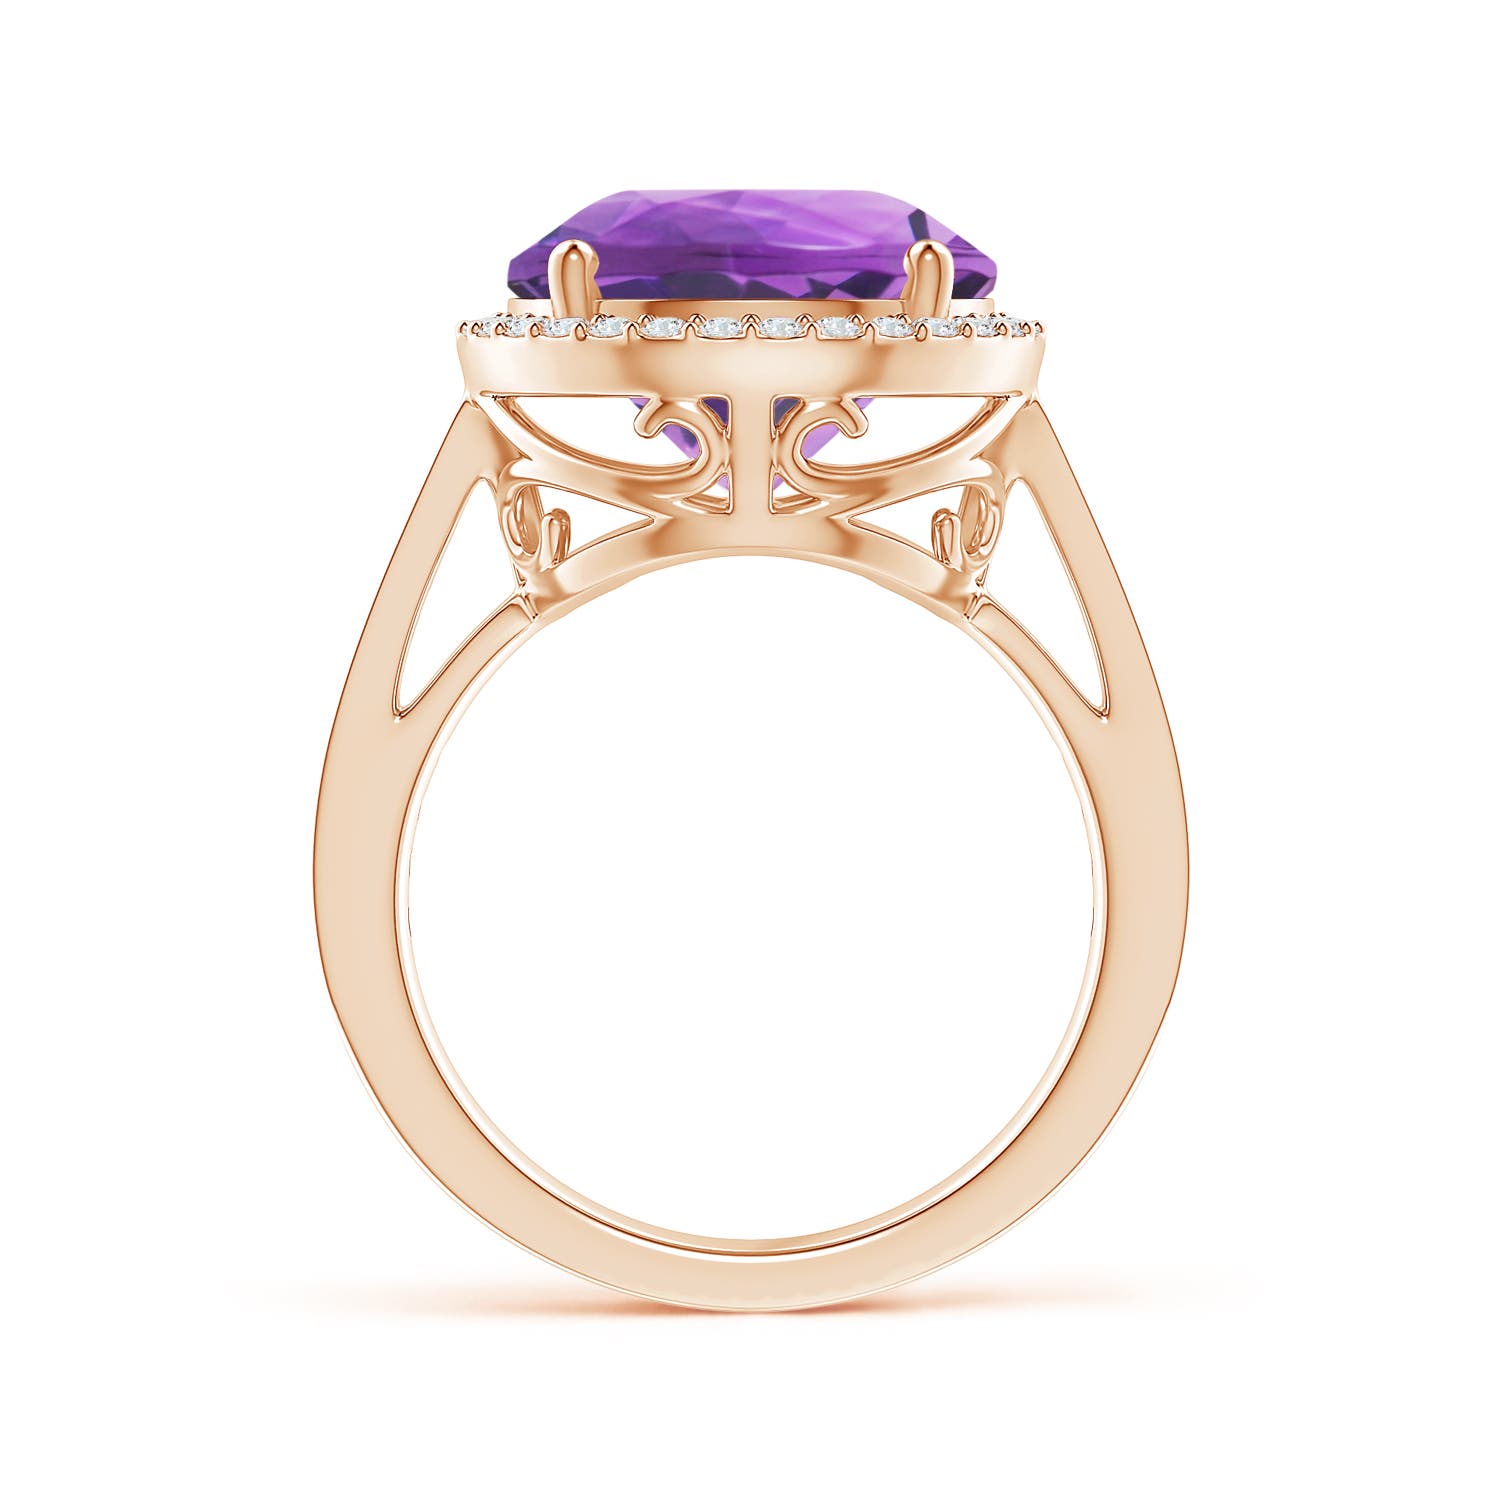 AA - Amethyst / 5.94 CT / 14 KT Rose Gold